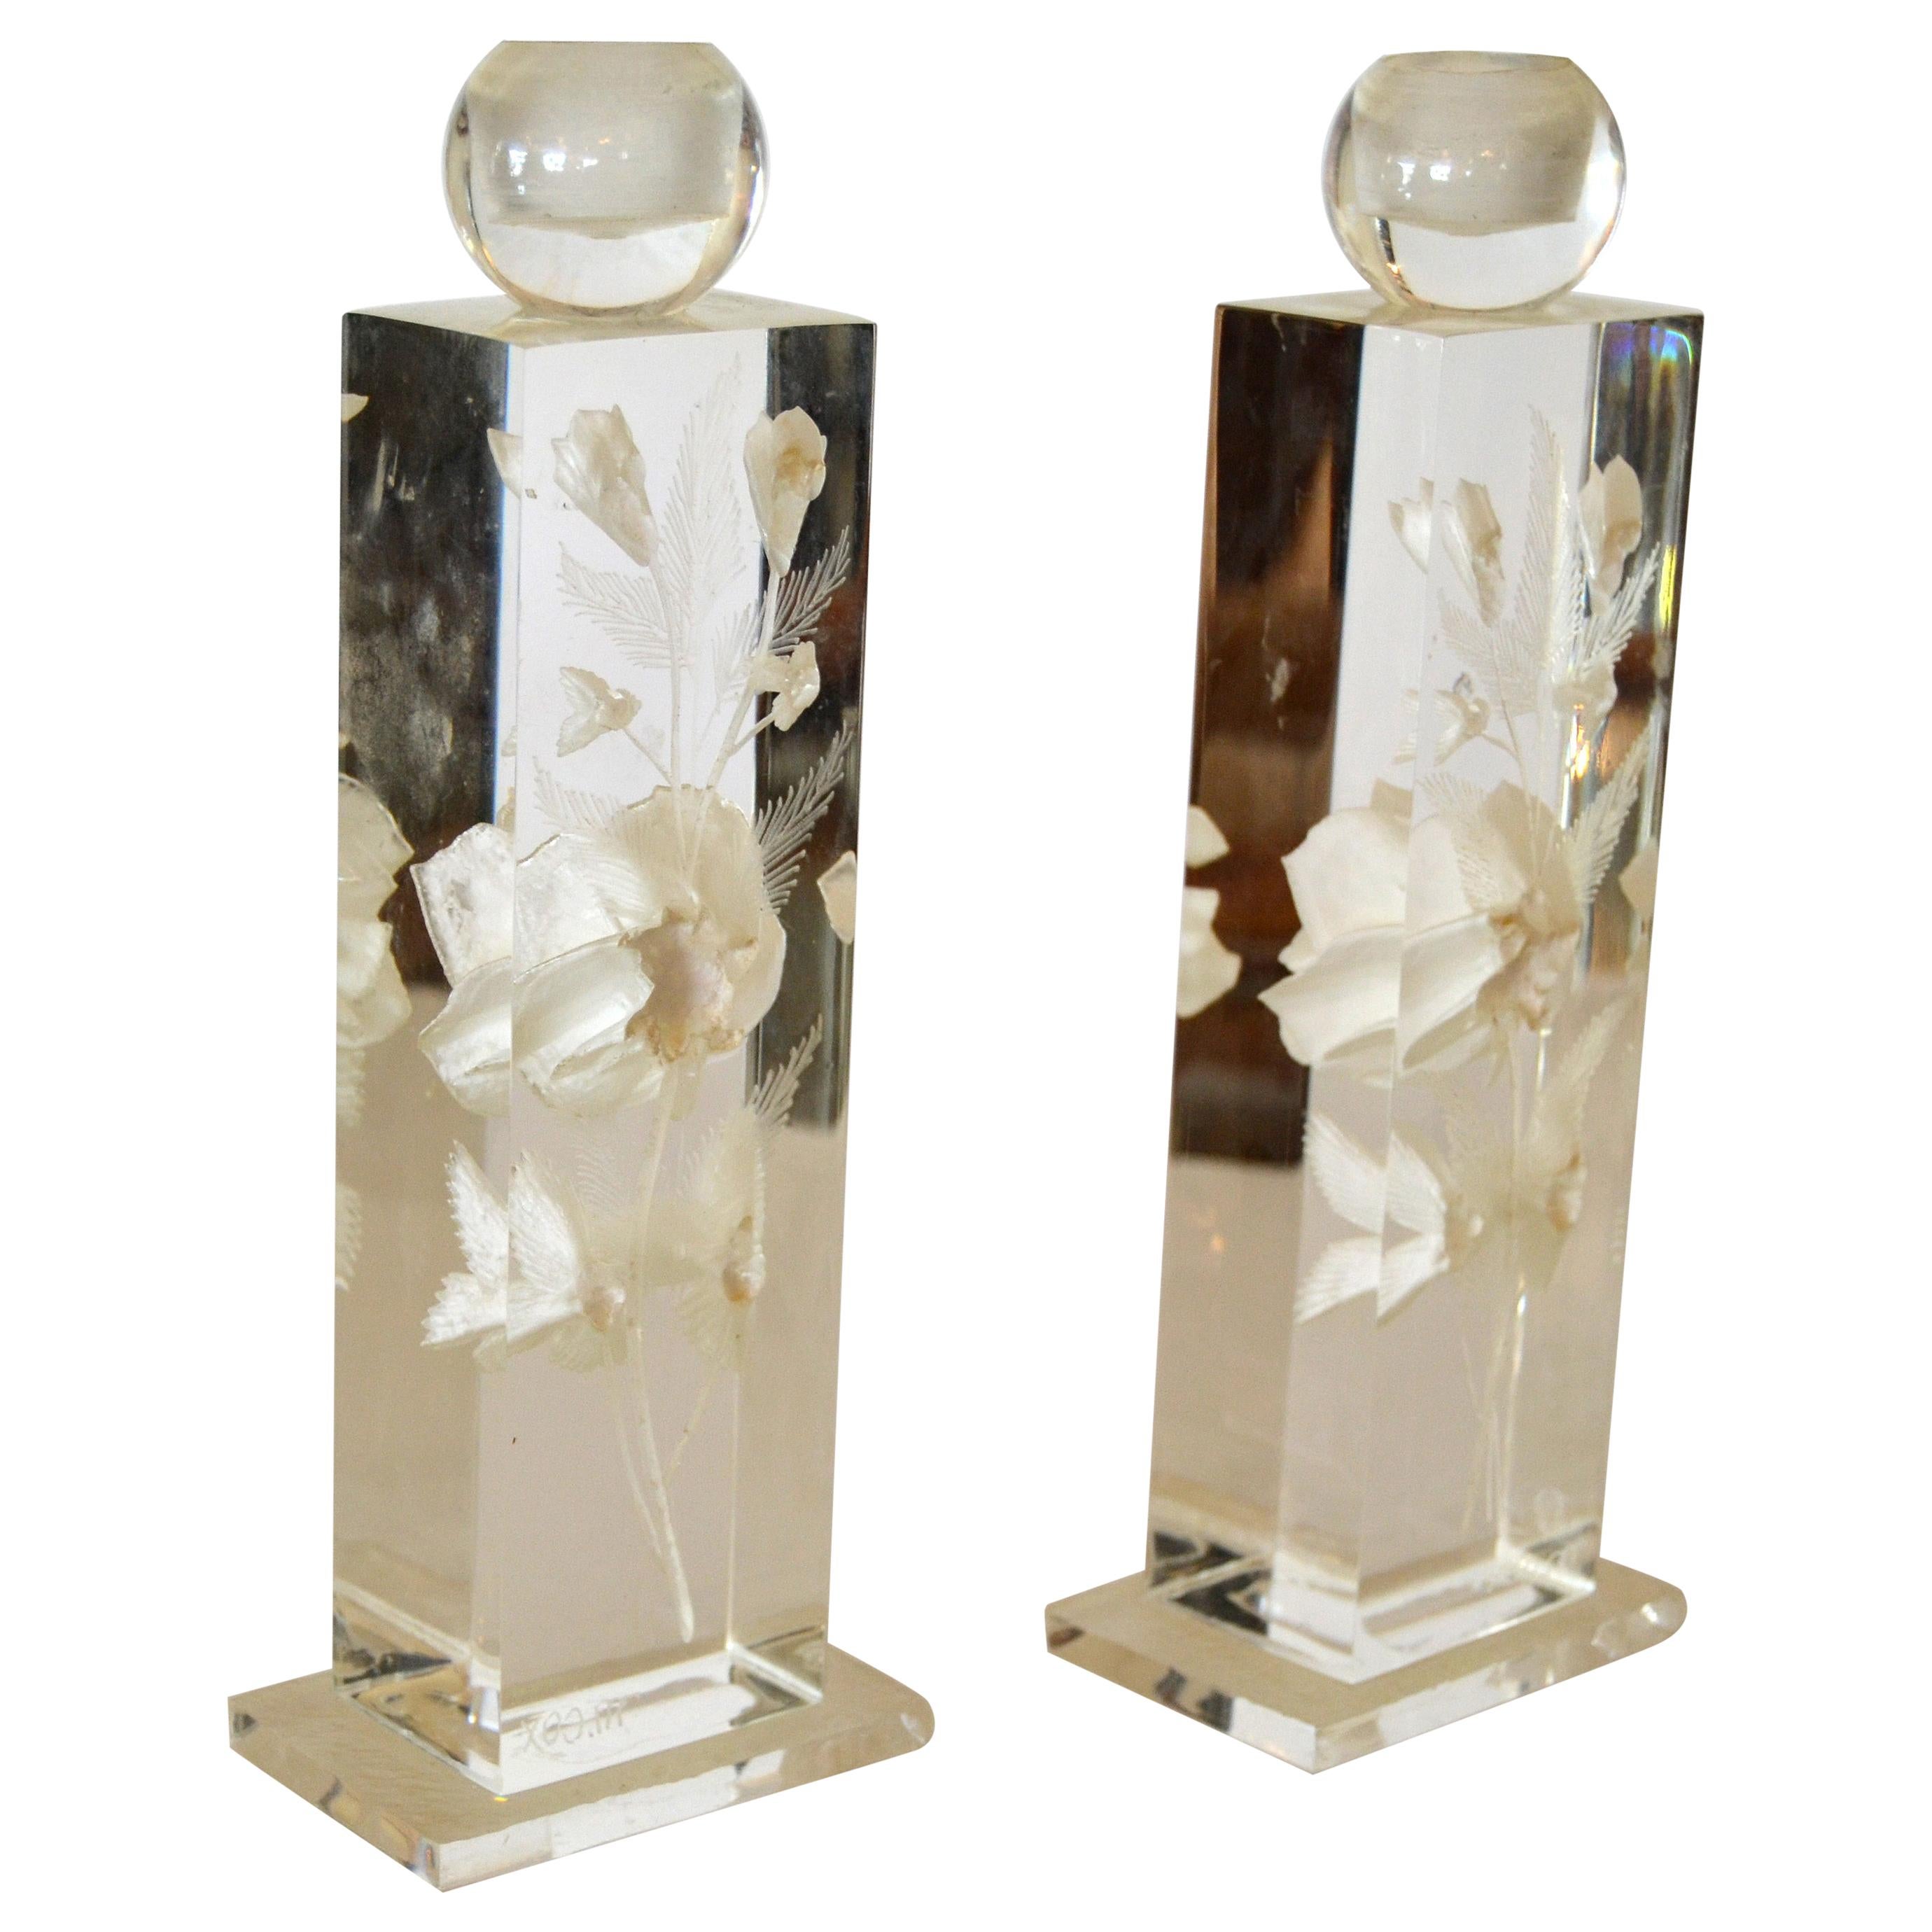 M. Cox Art Deco Clear Acrylic & White Flowers Candleholders, Candlesticks, Pair